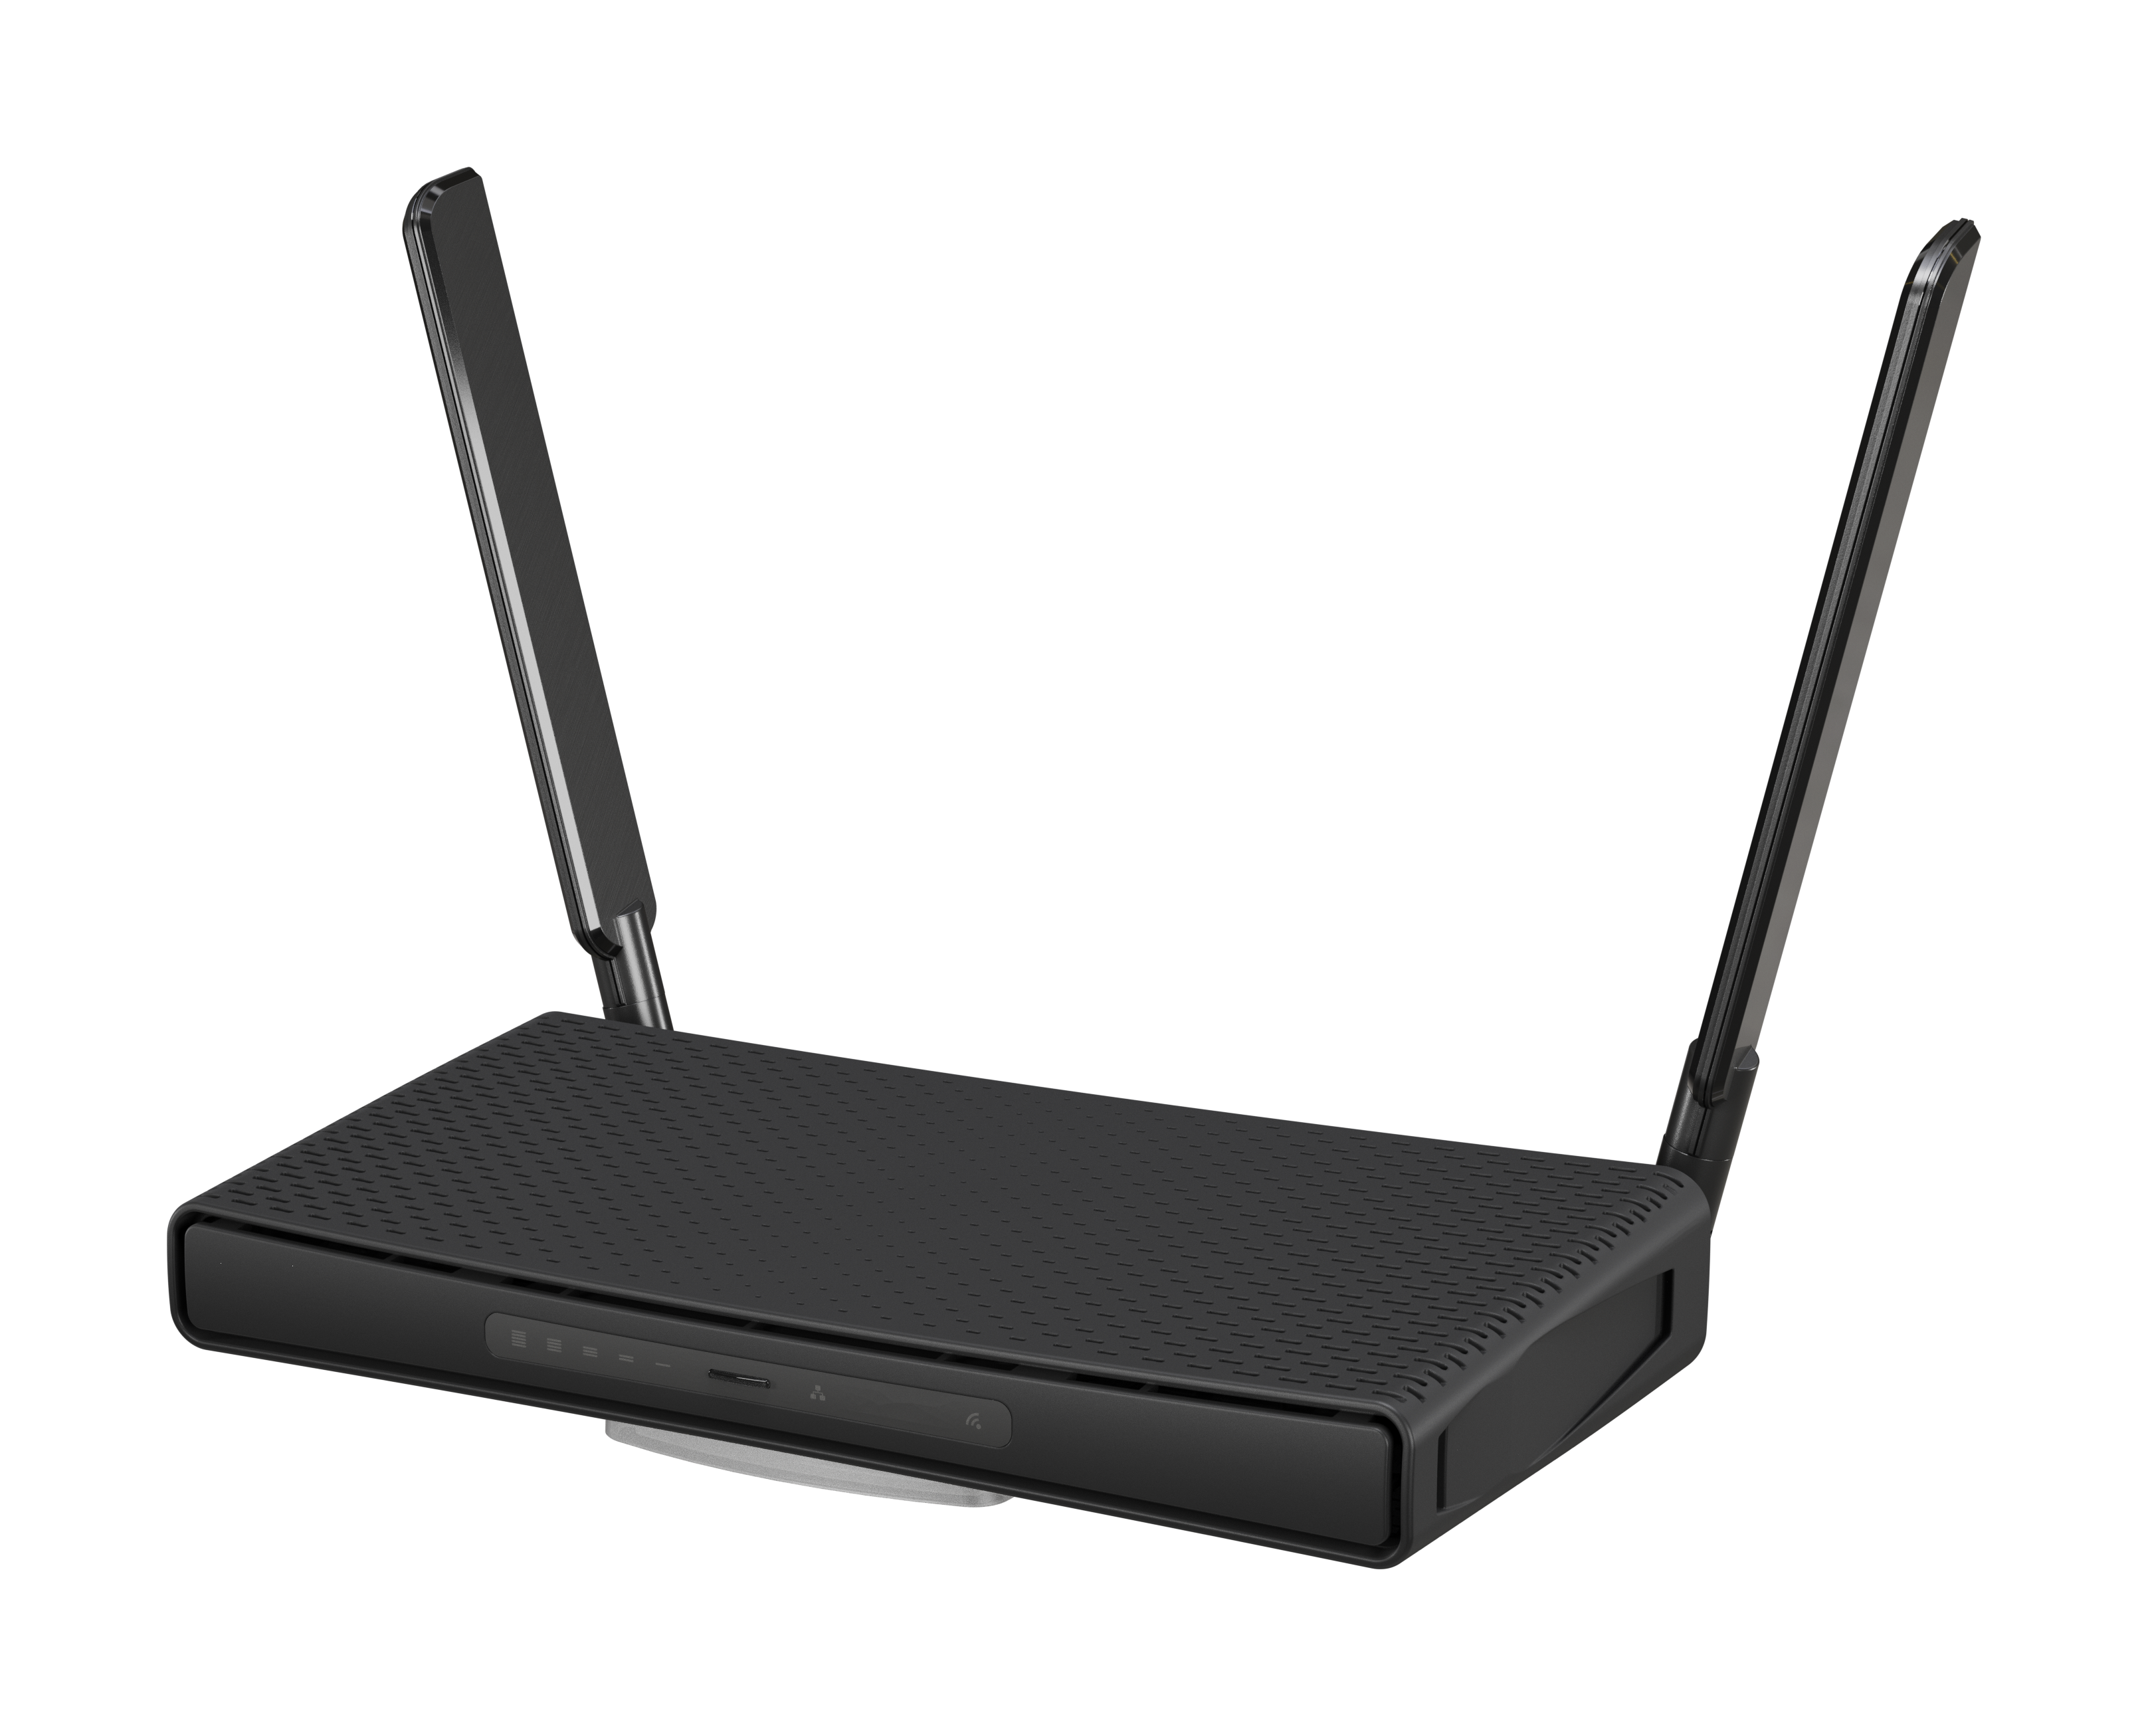 *hAP ax³ : 802.11ax Gen 6 Wireless Access Point, 2.5 Gigabit Ethernet, PoE, WPA3, and more!